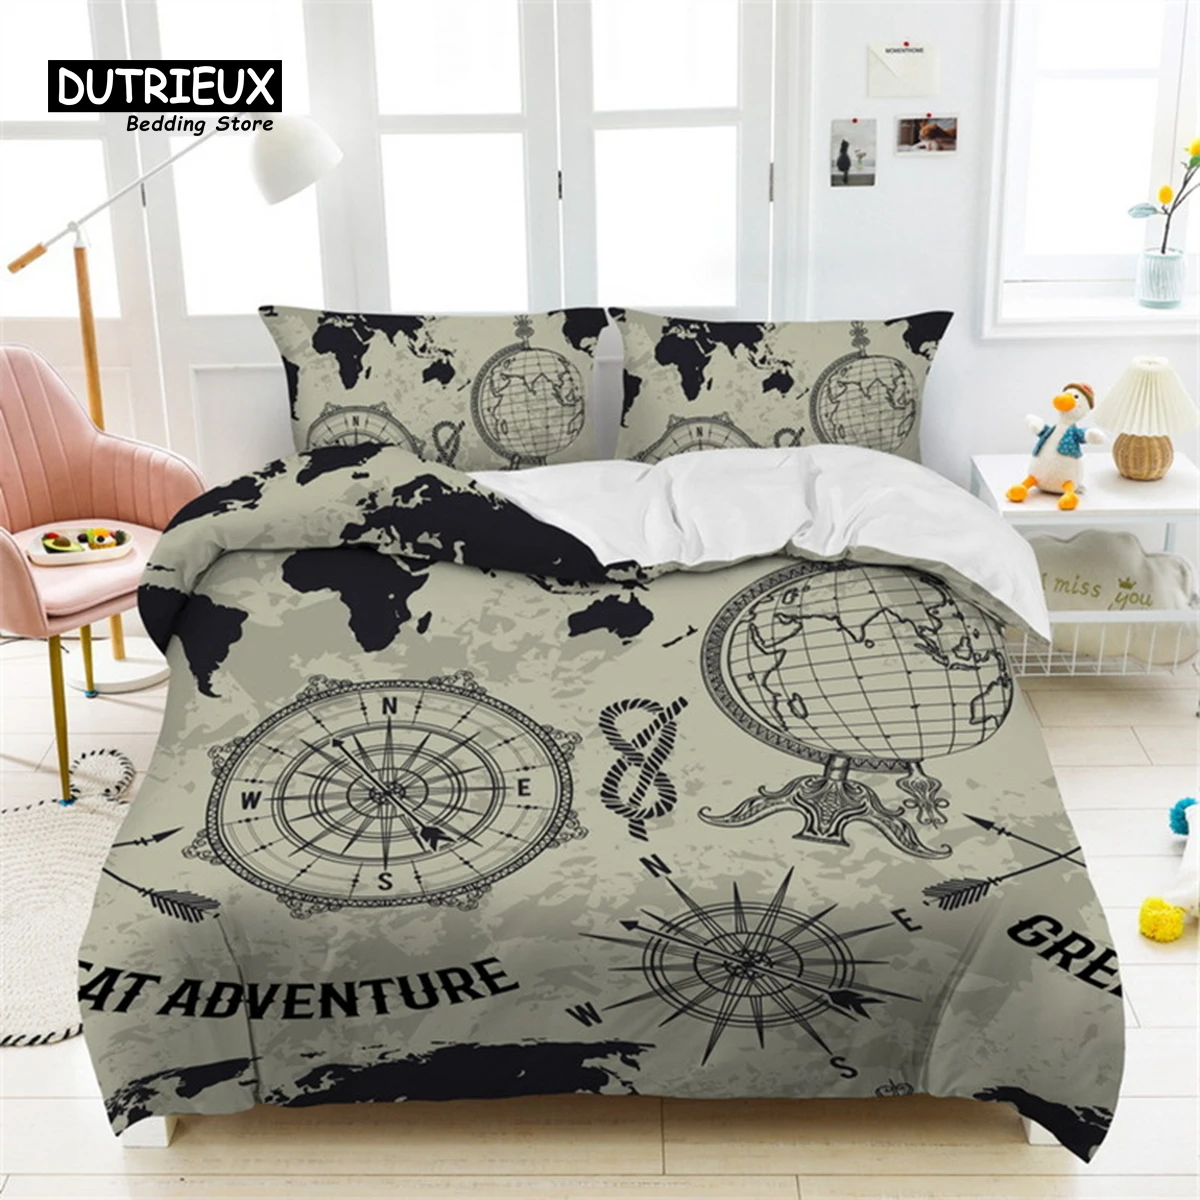 

Nautical Map Duvet Cover Compass Sailboat Print Bedding Set Microfiber Vintage World Map Quilt Cover Twin King For Teens Adults